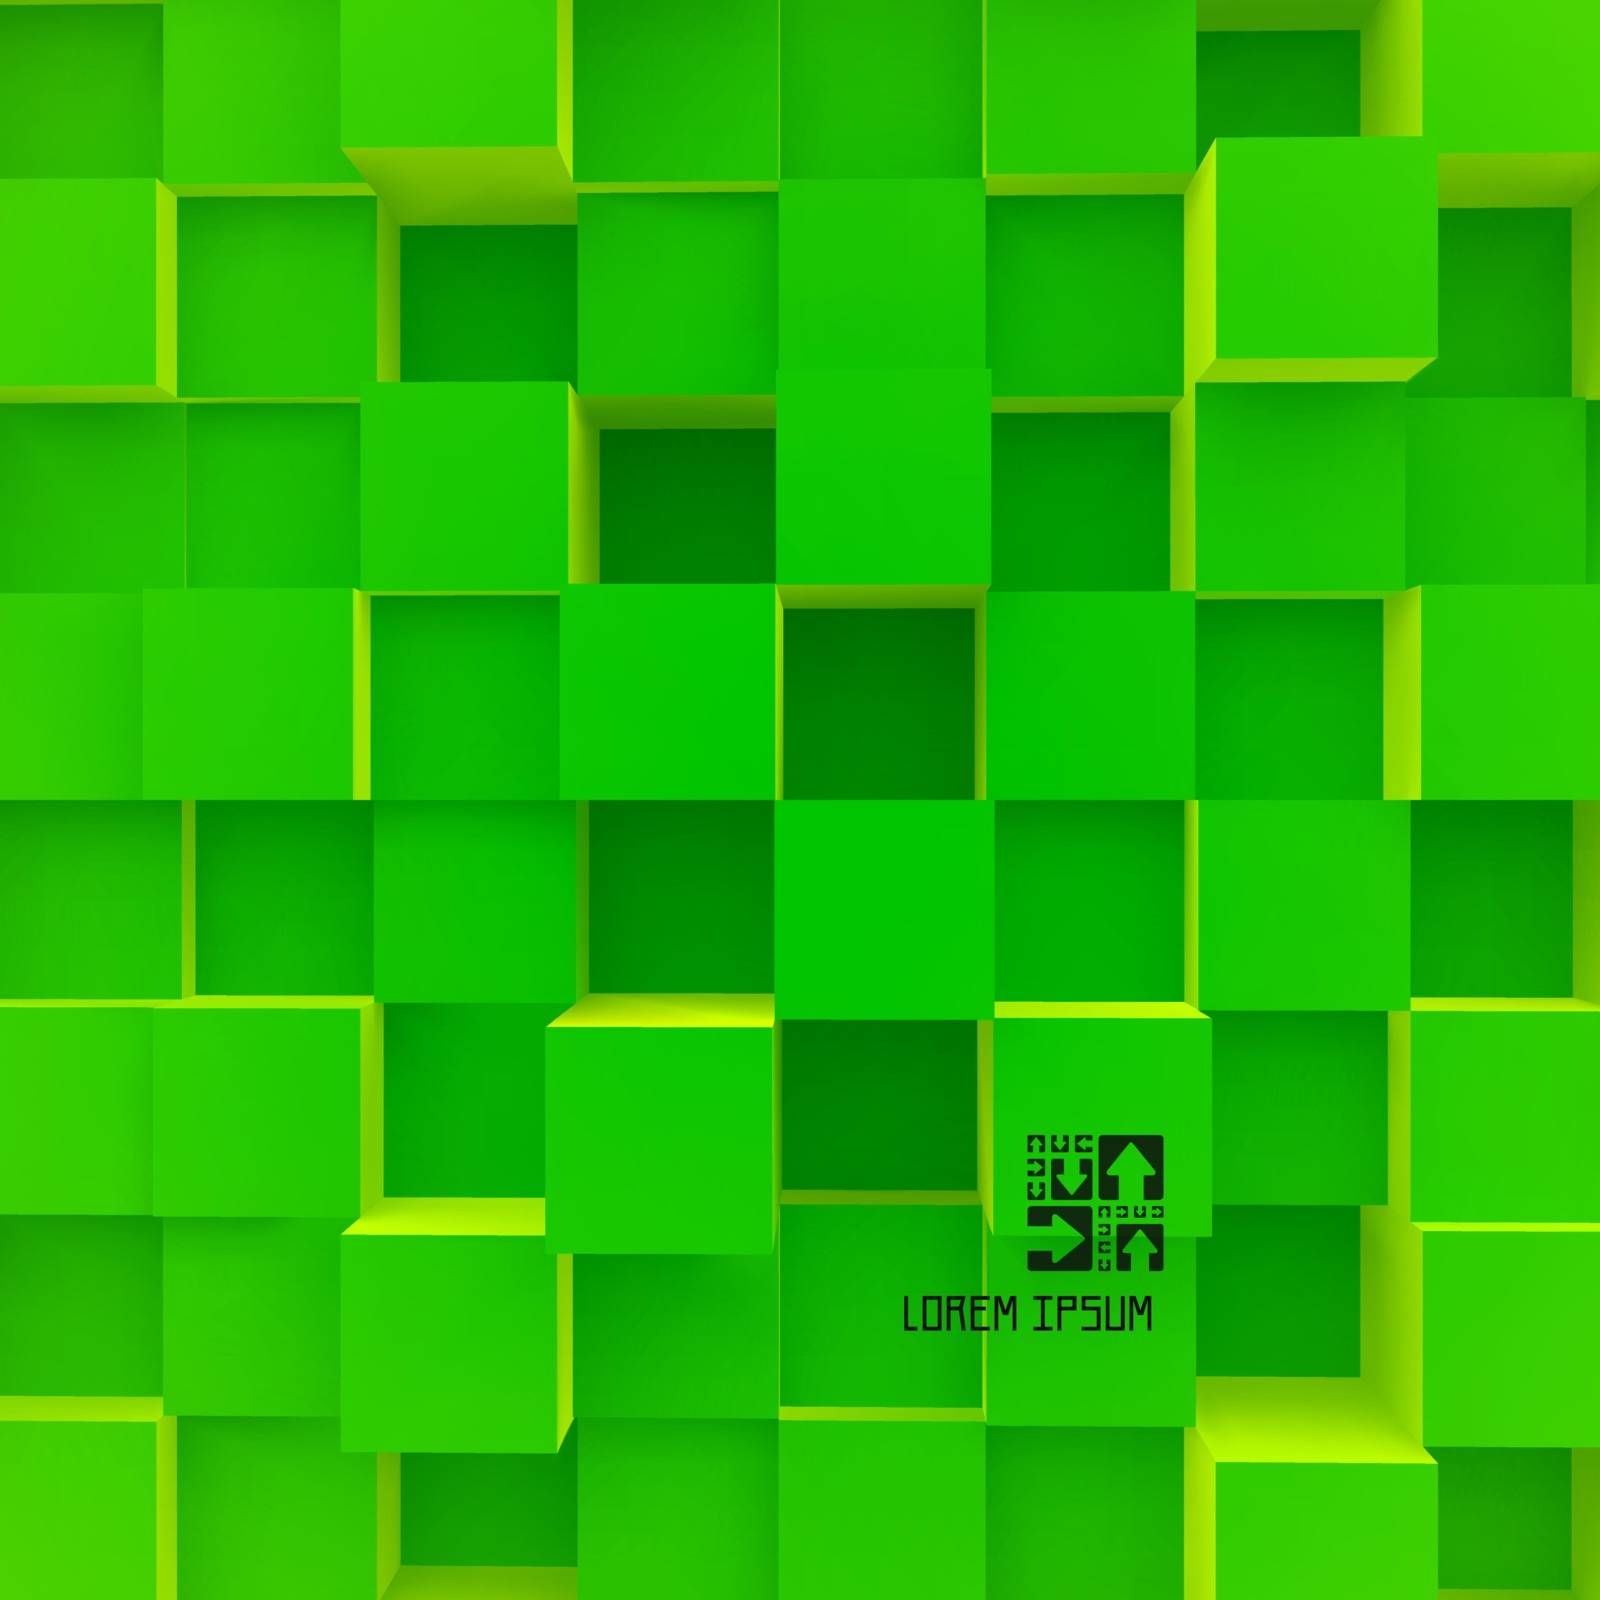 3d blocks structure background. Abstract illustration.